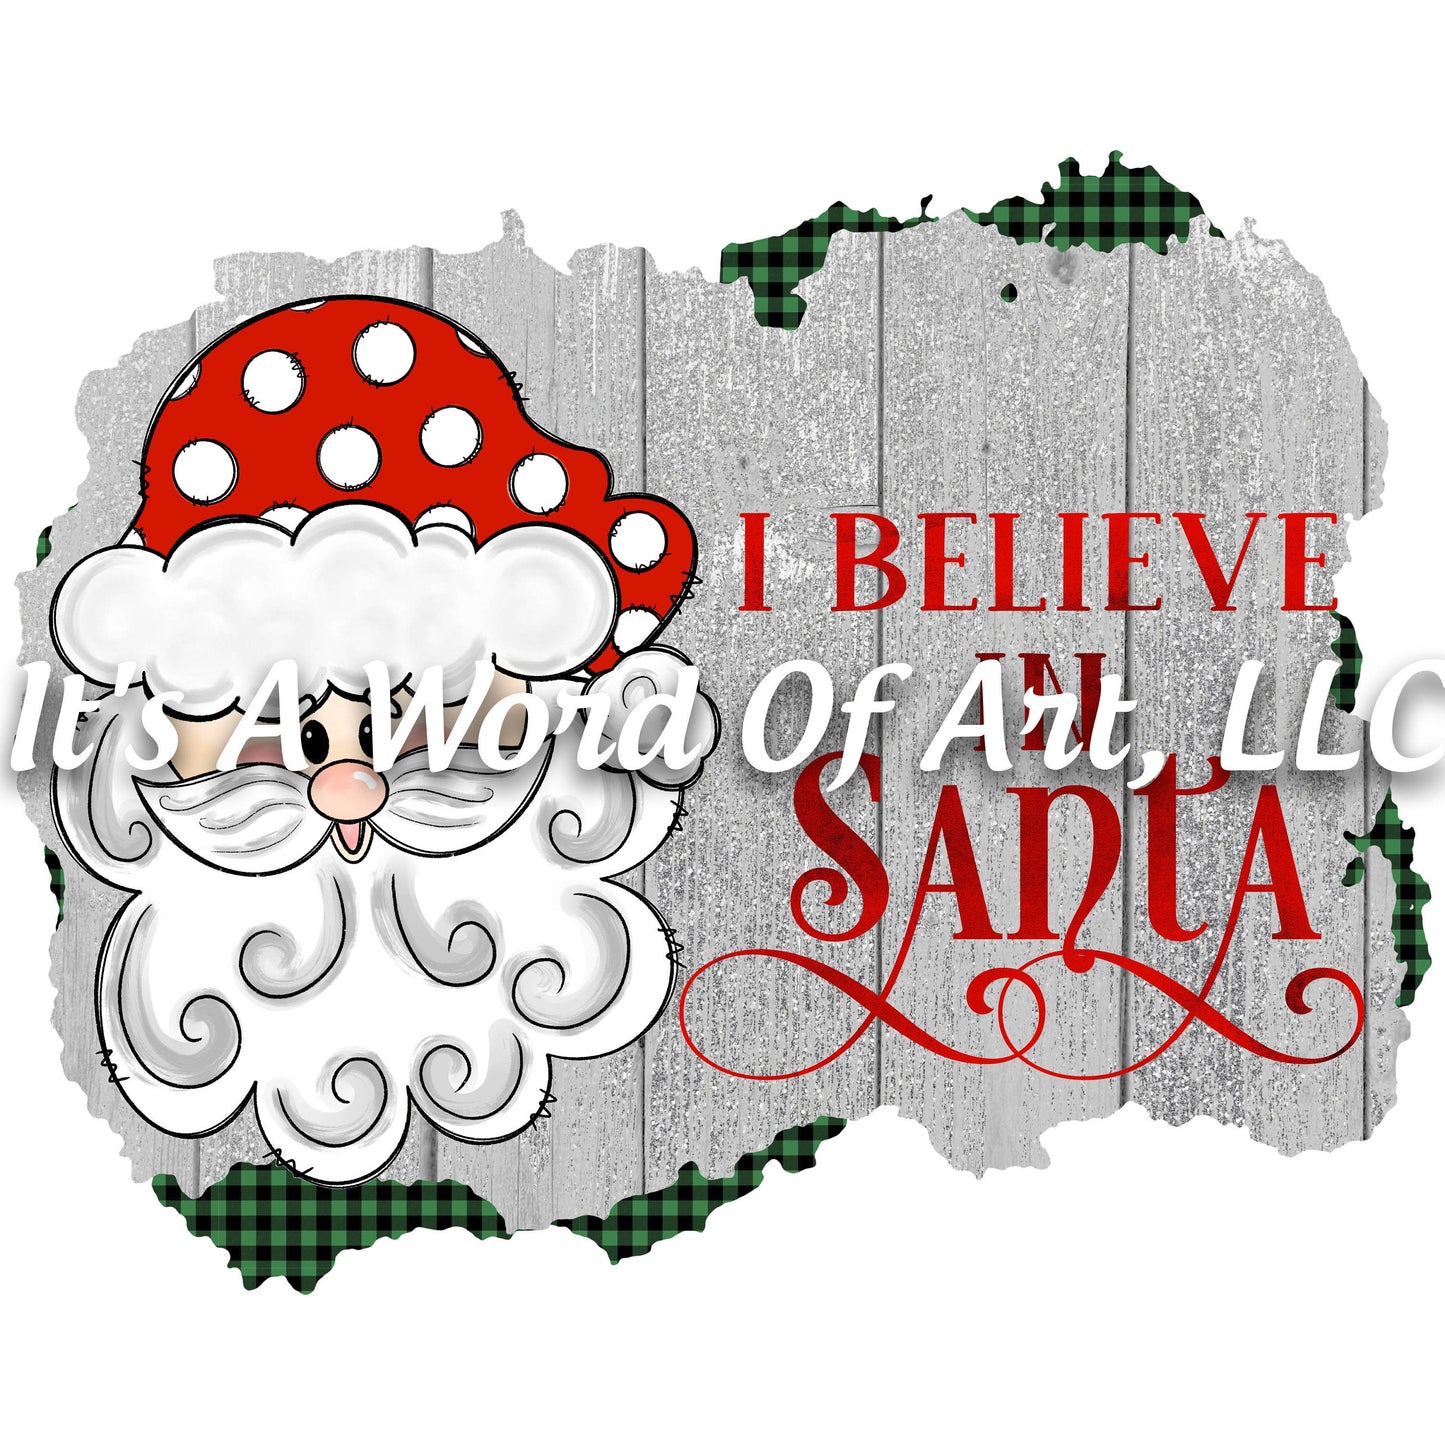 Christmas 248 - Believe In Santa - Sublimation Transfer Set/Ready To Press Sublimation Transfer/Sublimation Transfer